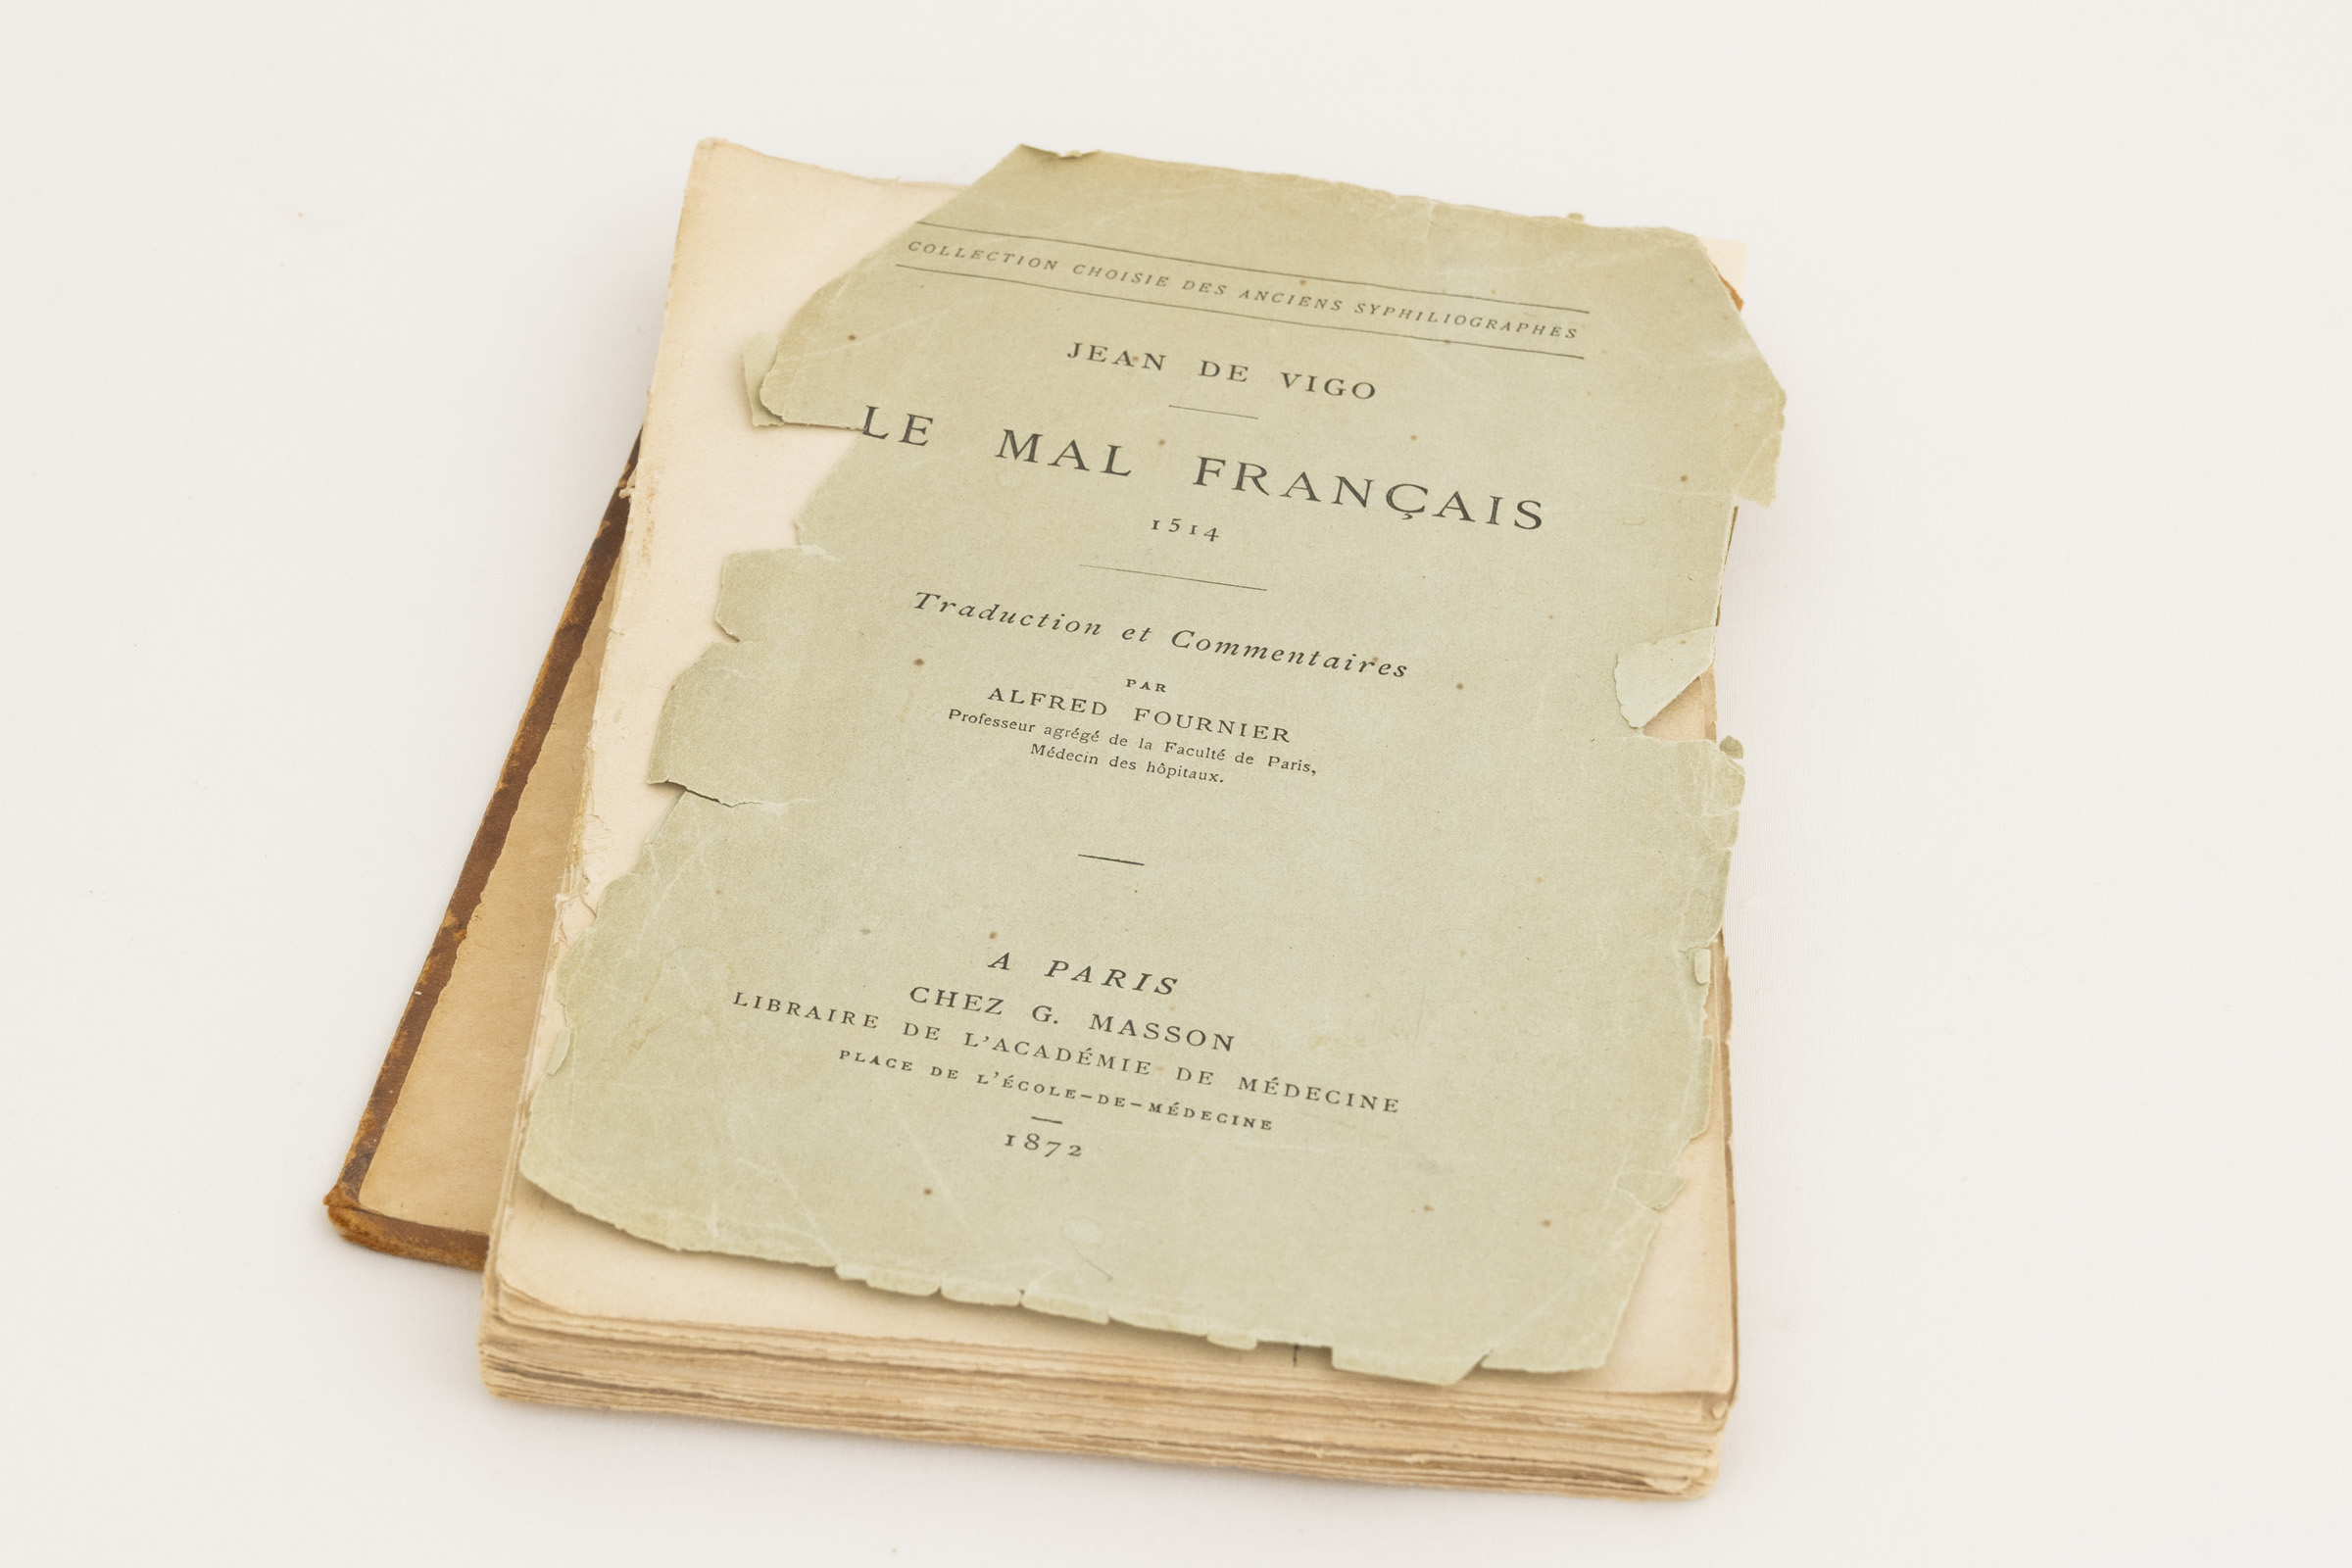 Worn copy of Le Mal Francais with pale green-blue cover